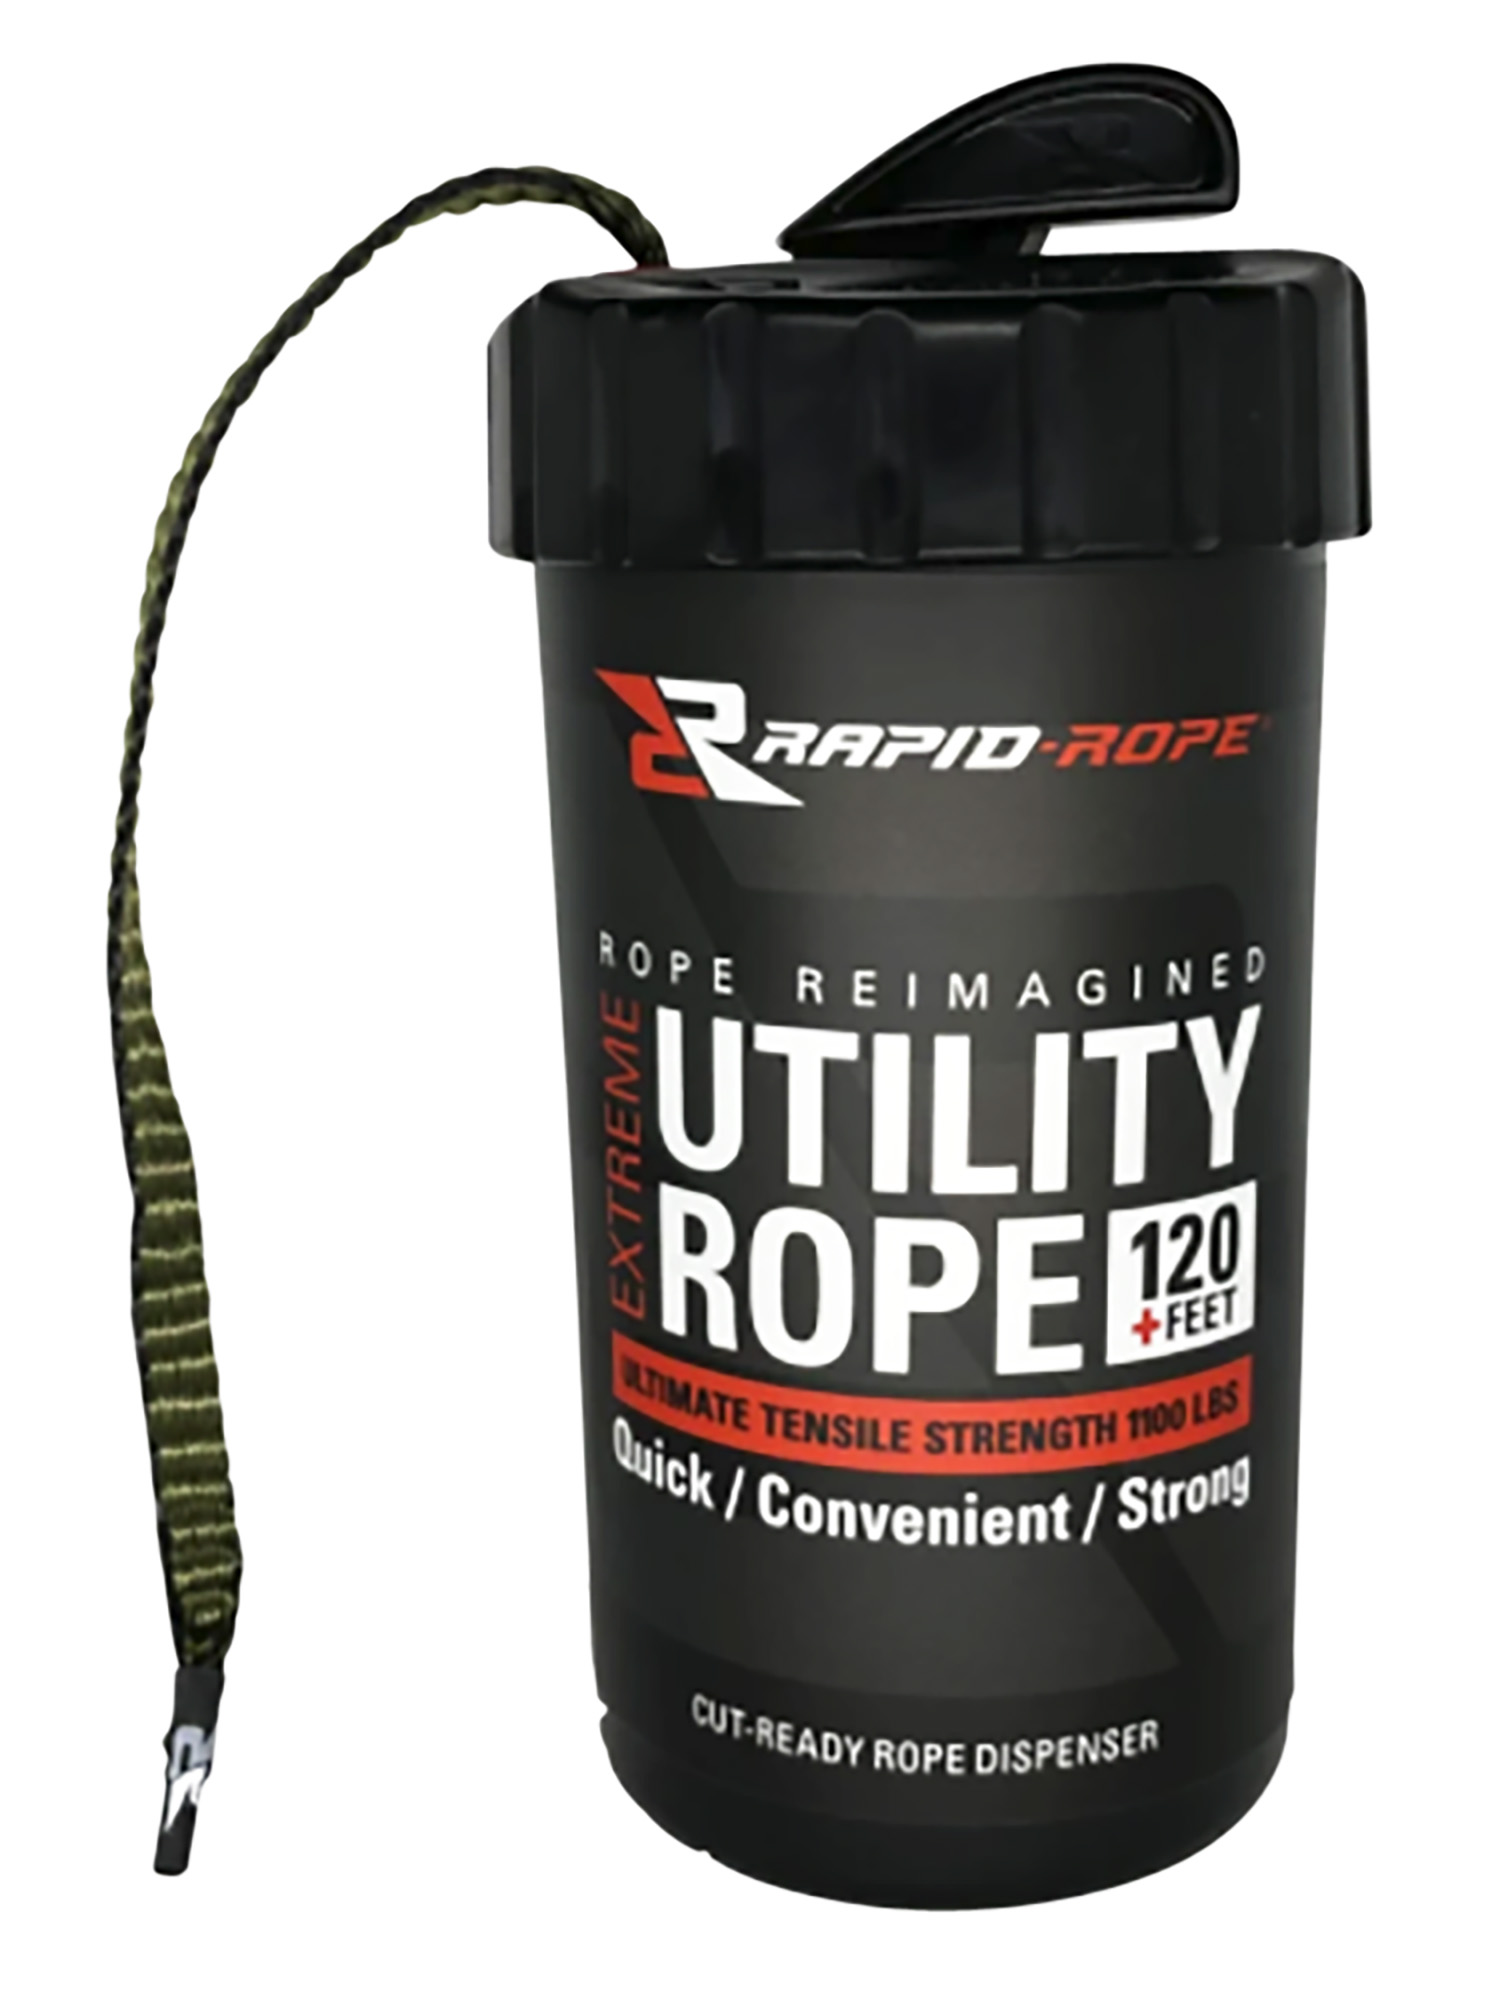 RAPID ROPE CANISTER OD GREEN 120+ FEET UTILITY ROPE W/CUTTR